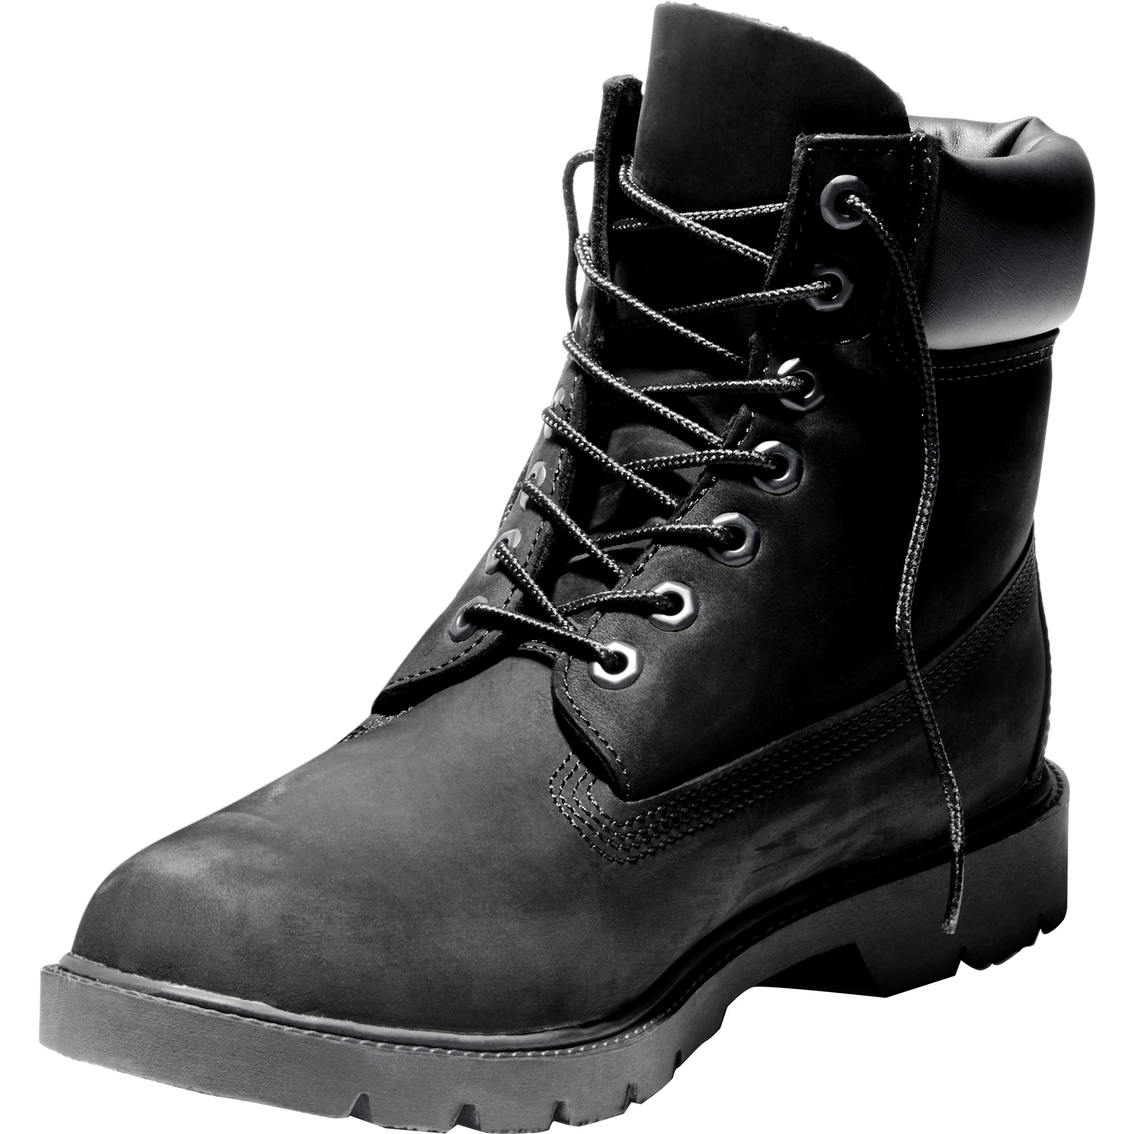 Timberland Classic 6 Inch Boots - Image 2 of 7